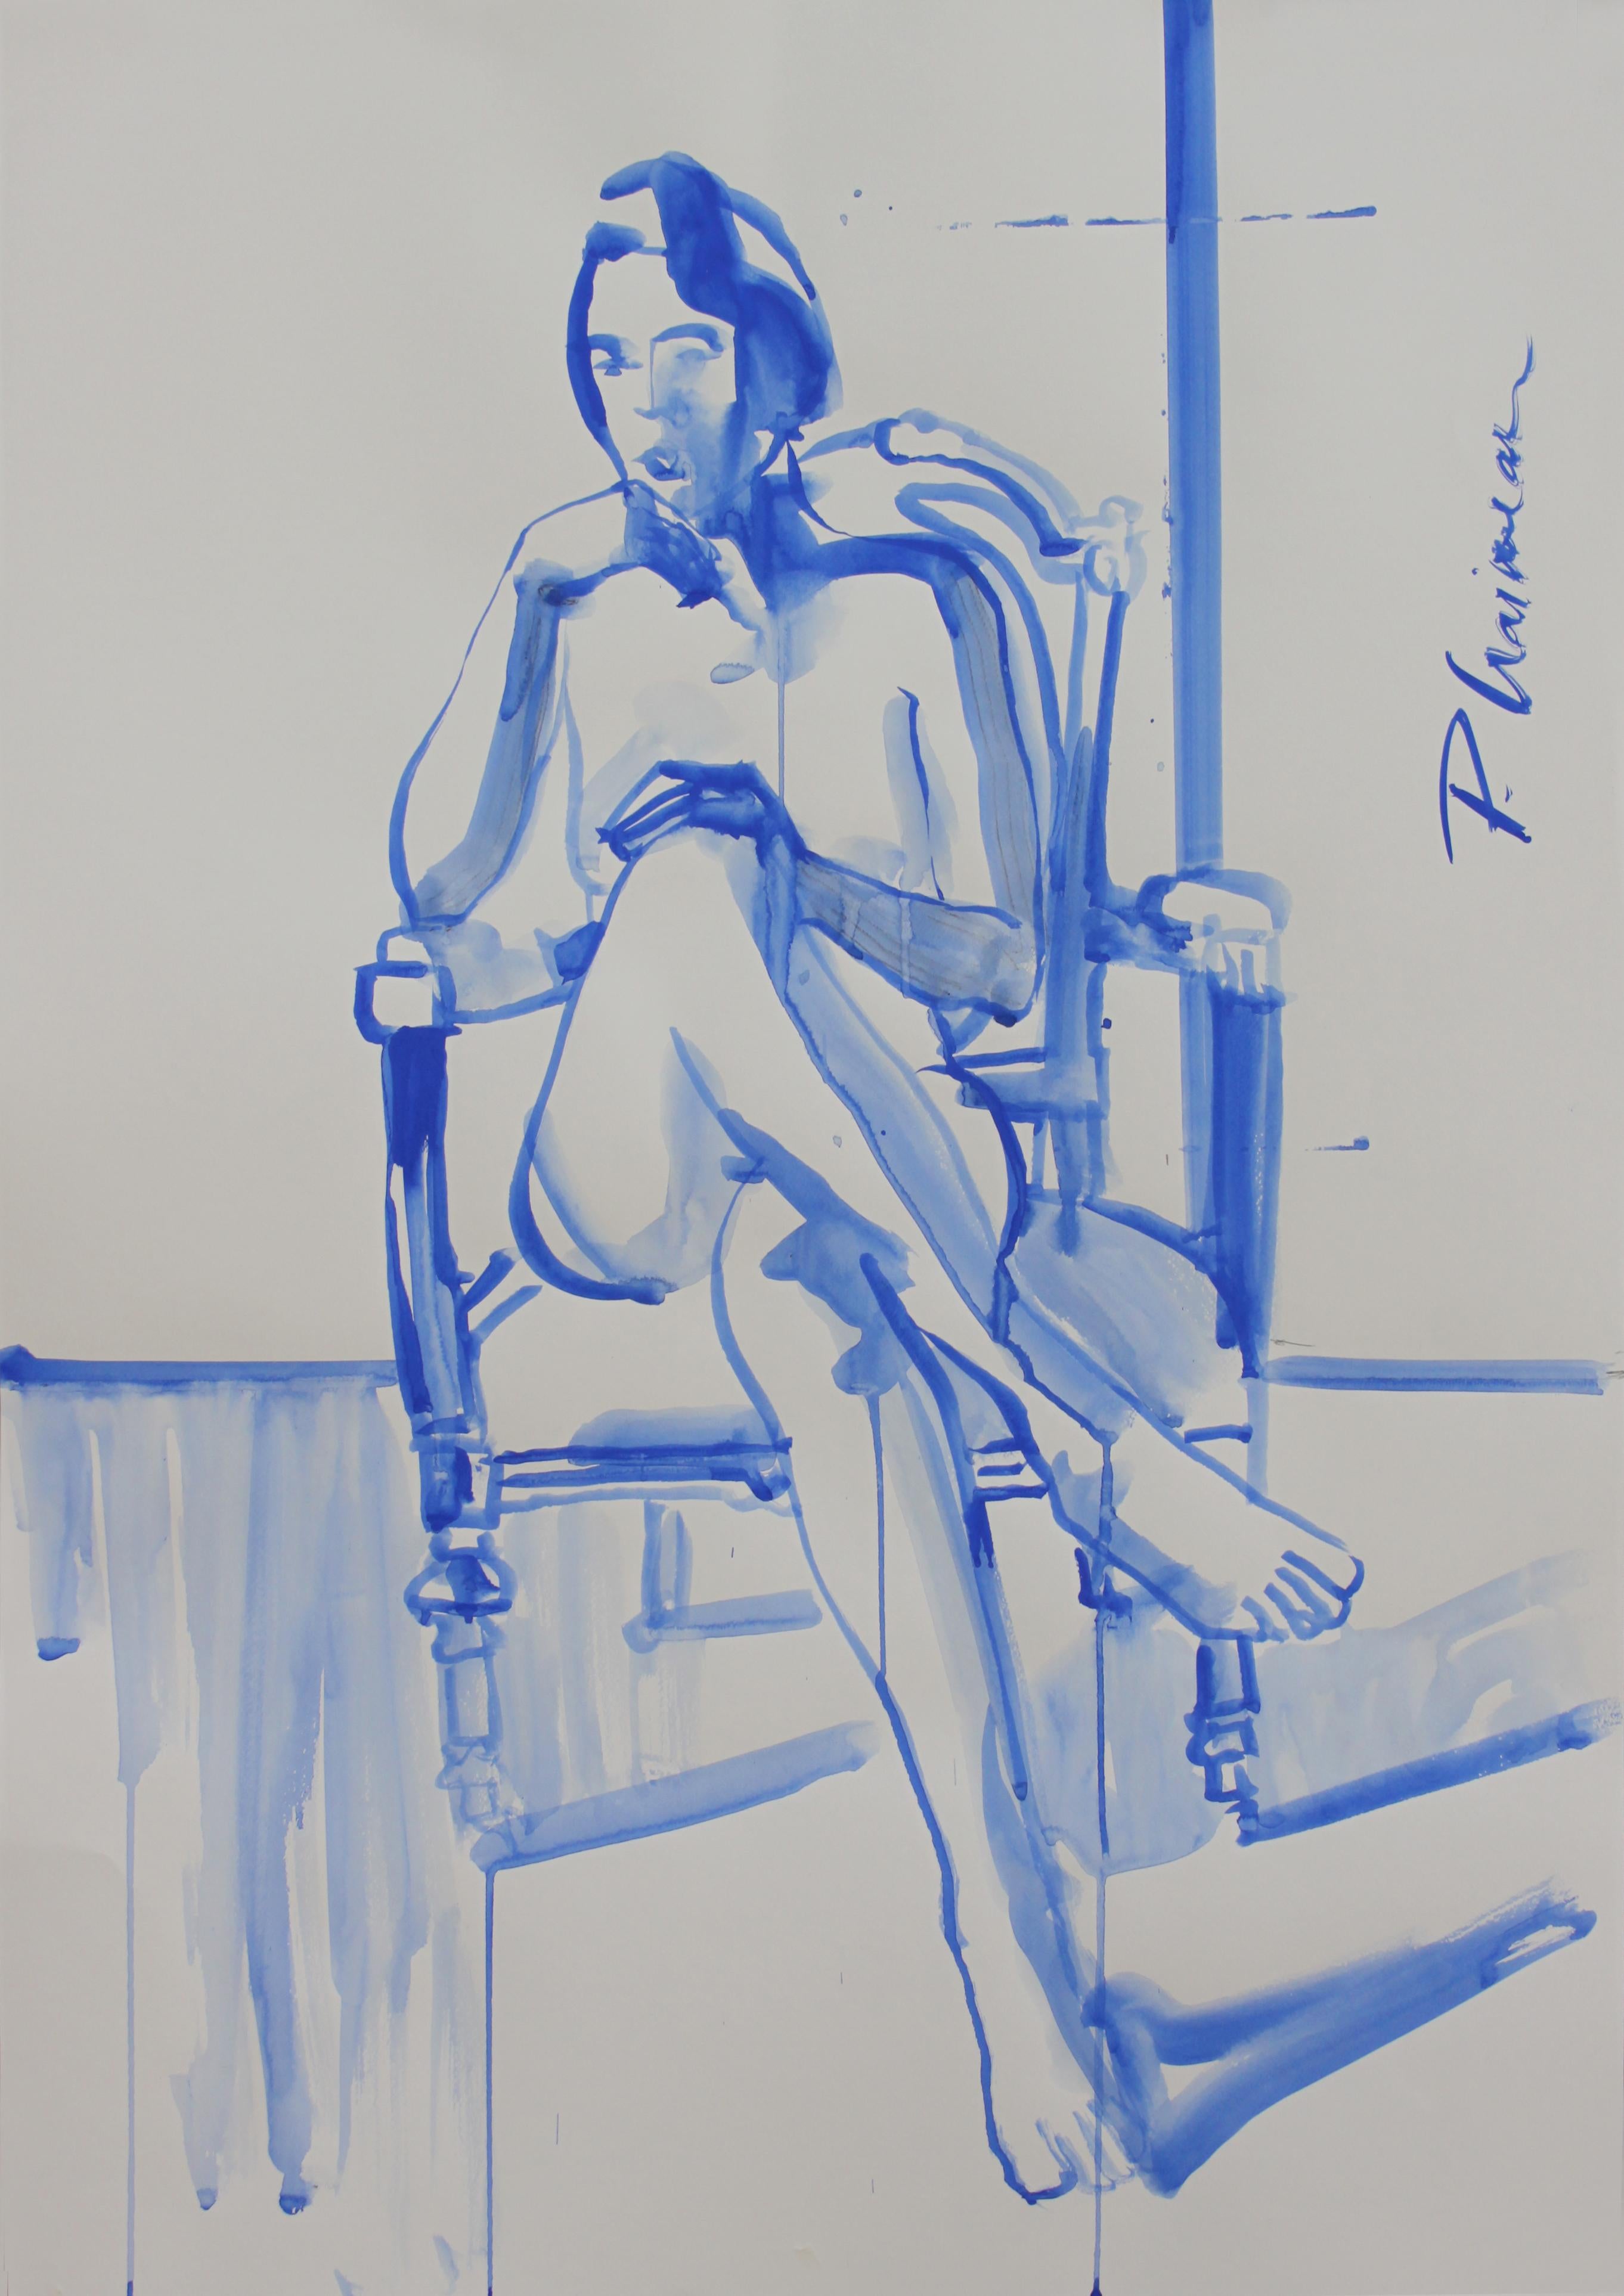 "Silence", pencil and ultramarine tempera on paper, inspired by Matisse.
Part of Nude in Interior series.

Large drawing. Shipped rolled in a tube, directly from the artist's studio.
Size  39x27.5in  /100x70cm

Artist Statement
"I started by